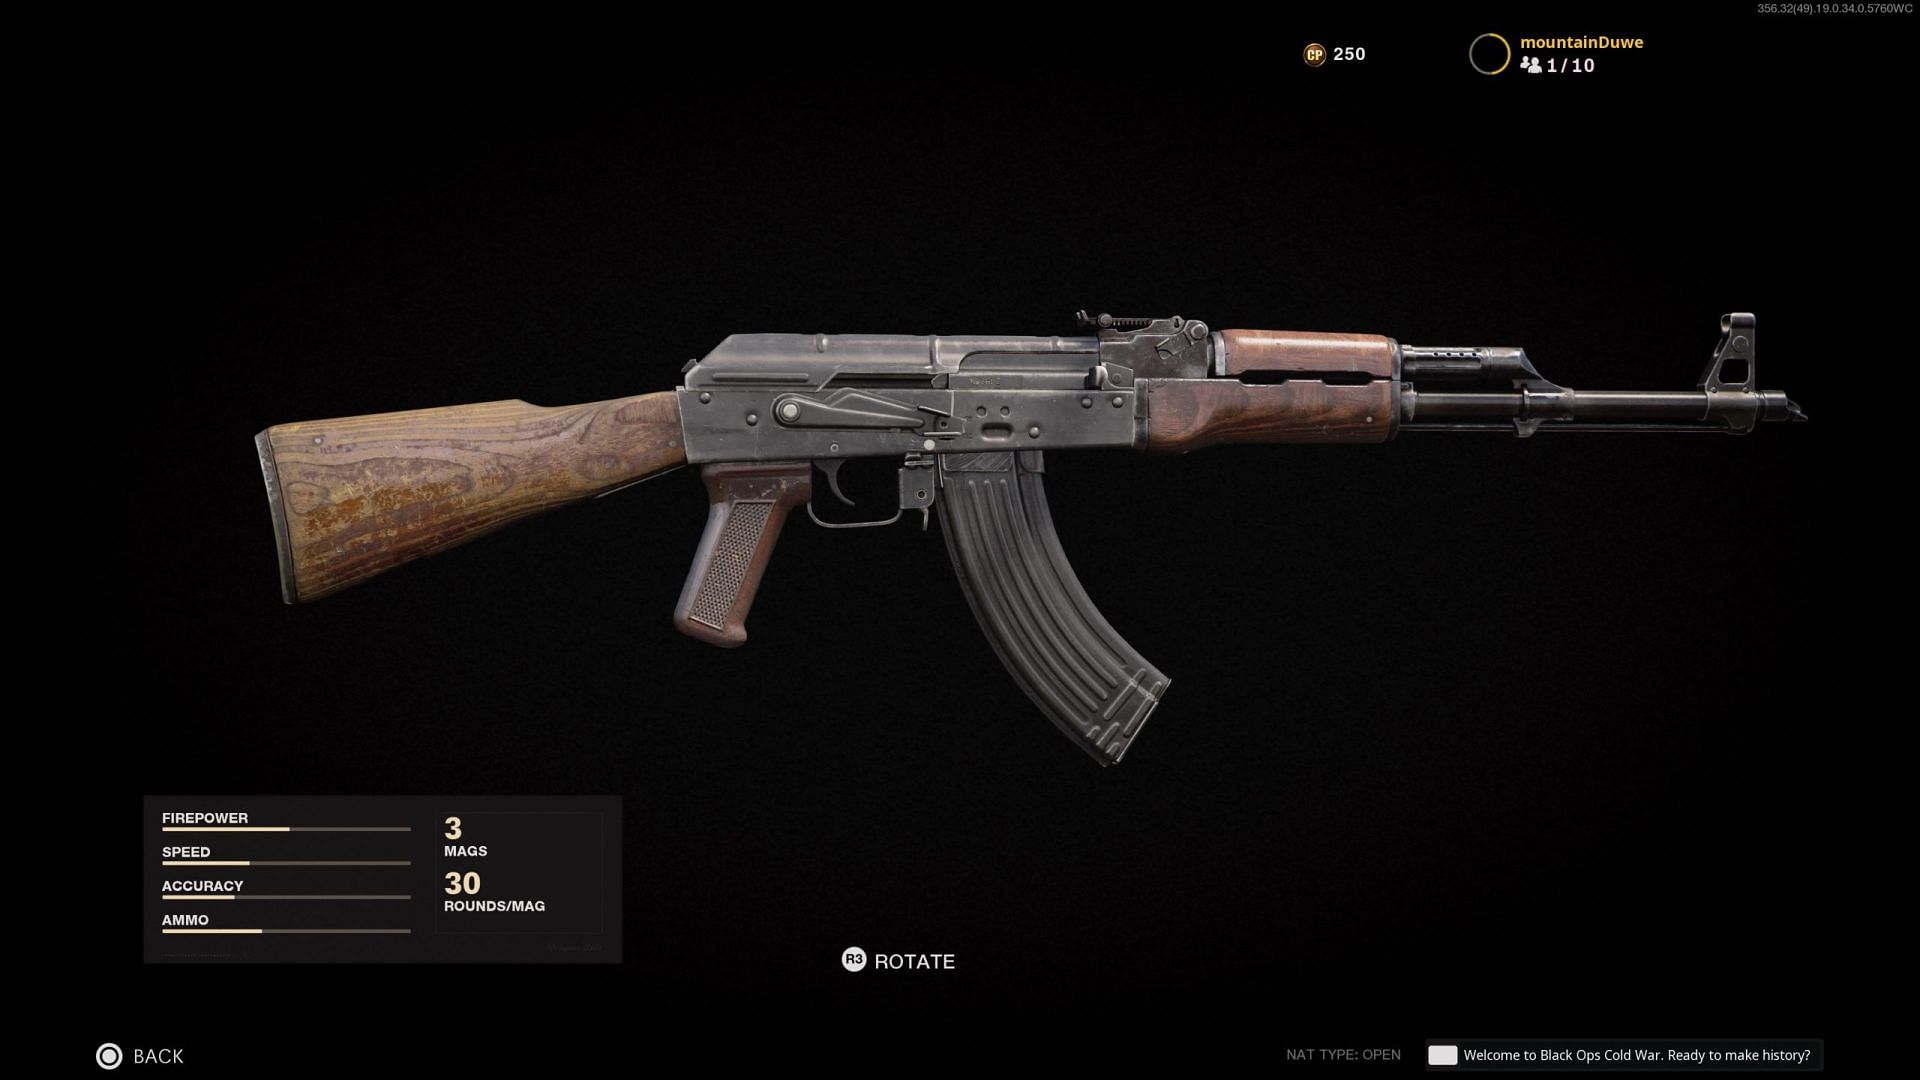 AK47 in Call of Duty Black Ops Cold War (image via Activision)